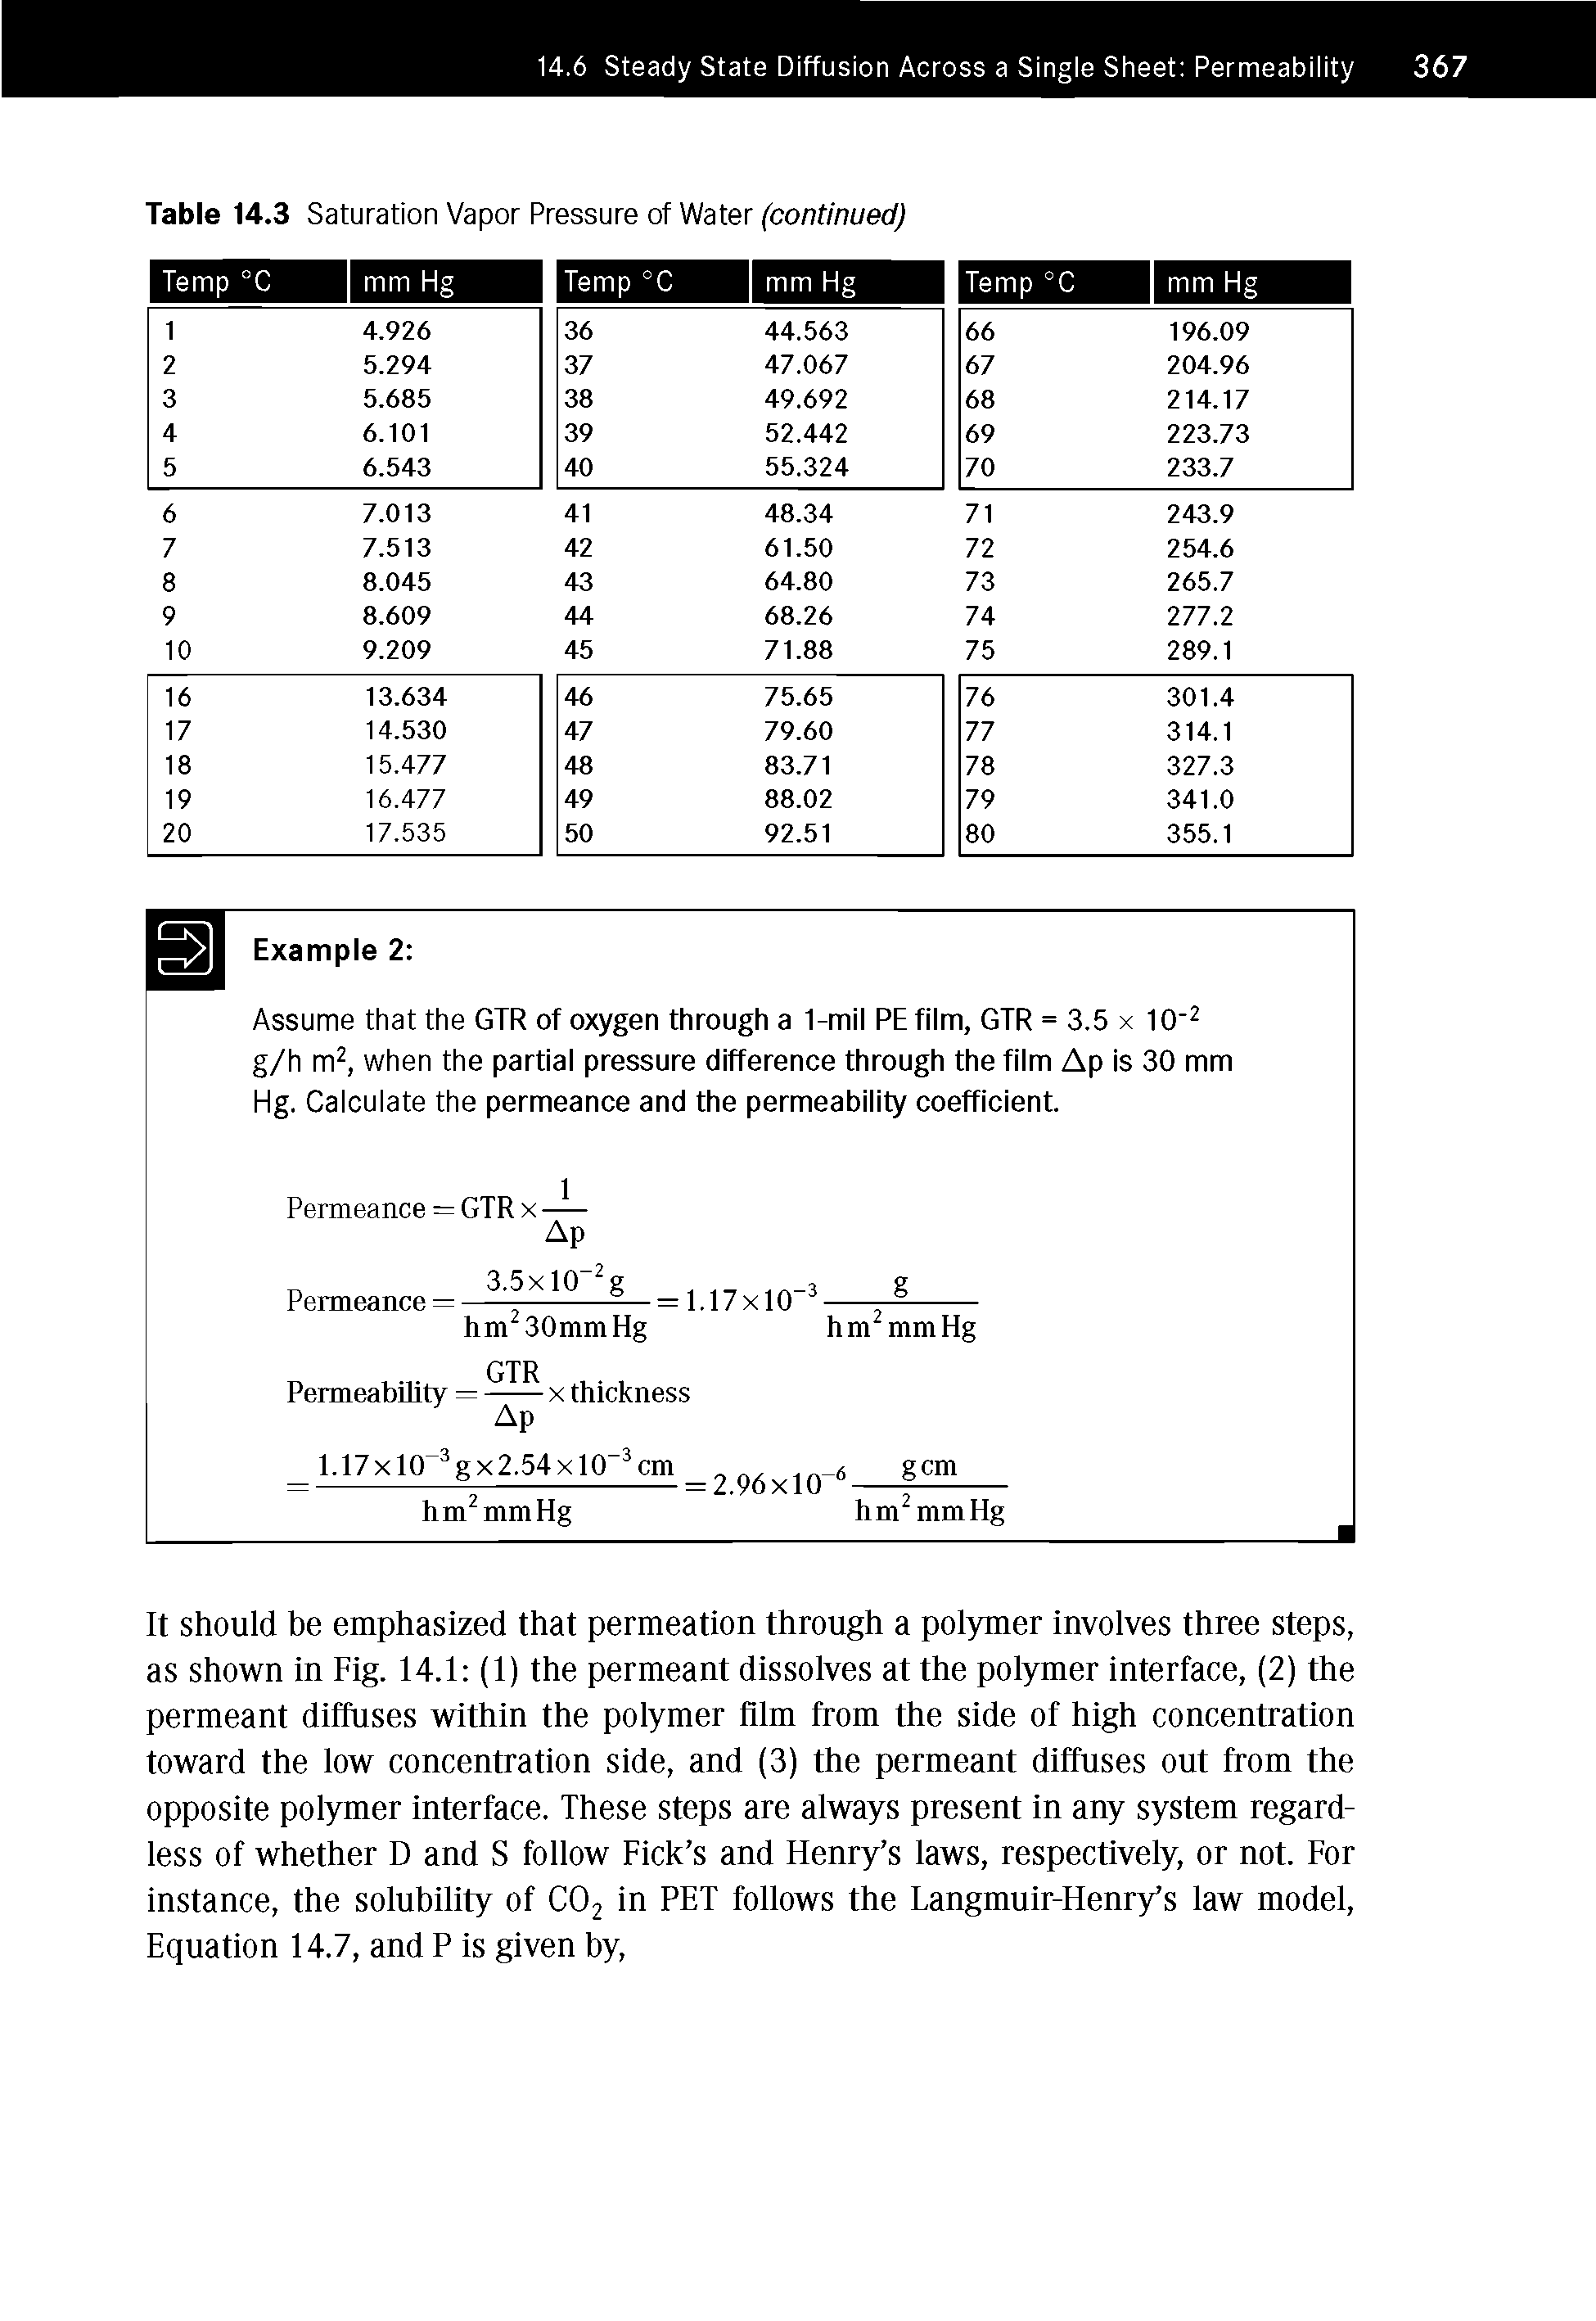 Table 14.3 Saturation Vapor Pressure of Water (continued)...